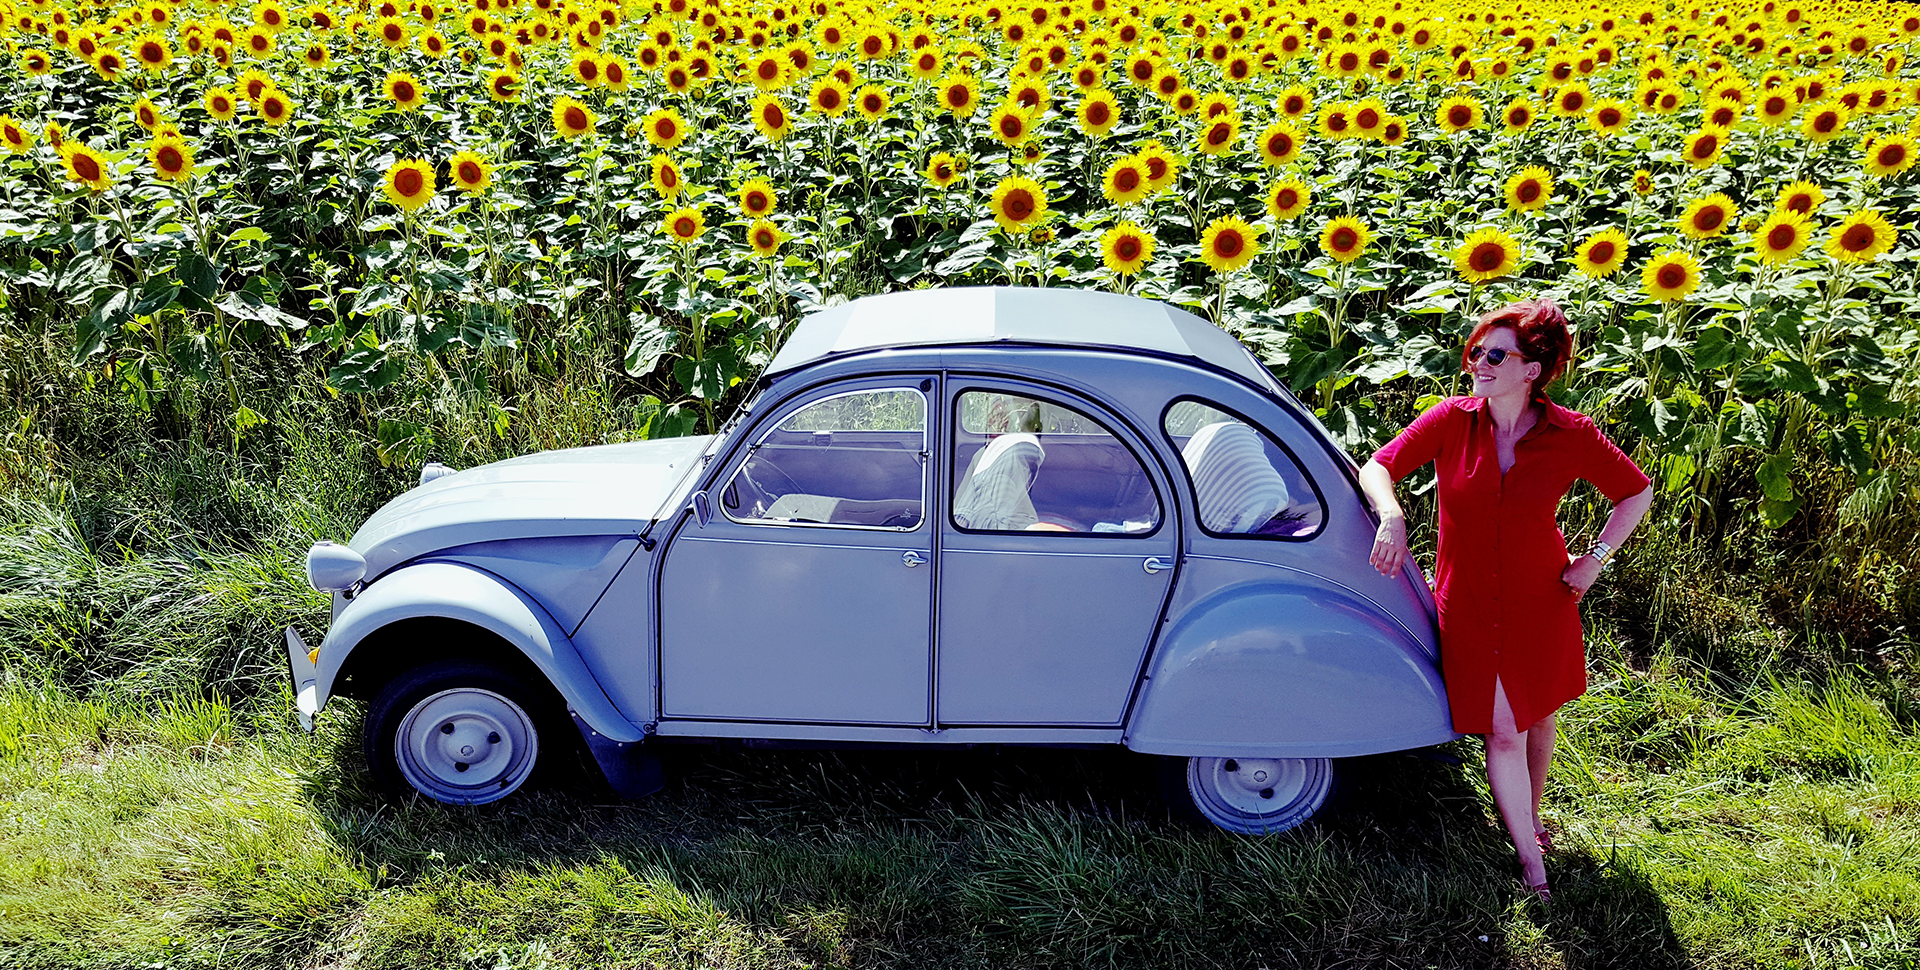 Lois Pryce by a 2CV car in a field of sunflowers